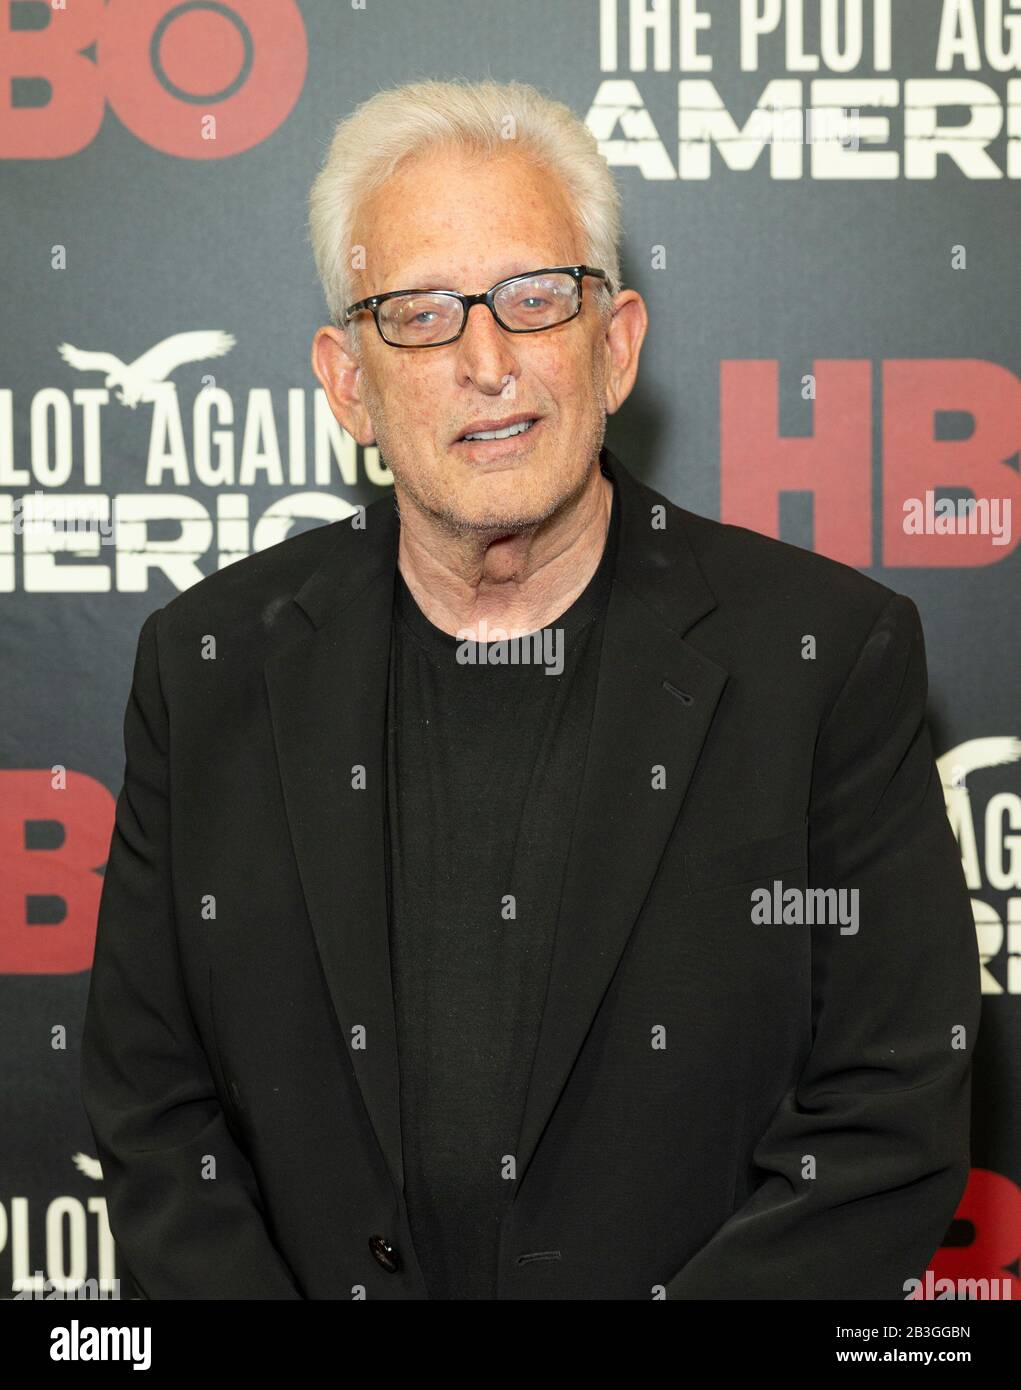 New York, NY - March 4, 2020: Joe Roth attends HBO's 'The Plot Against America' premiere at Florence Gould Hall Stock Photo